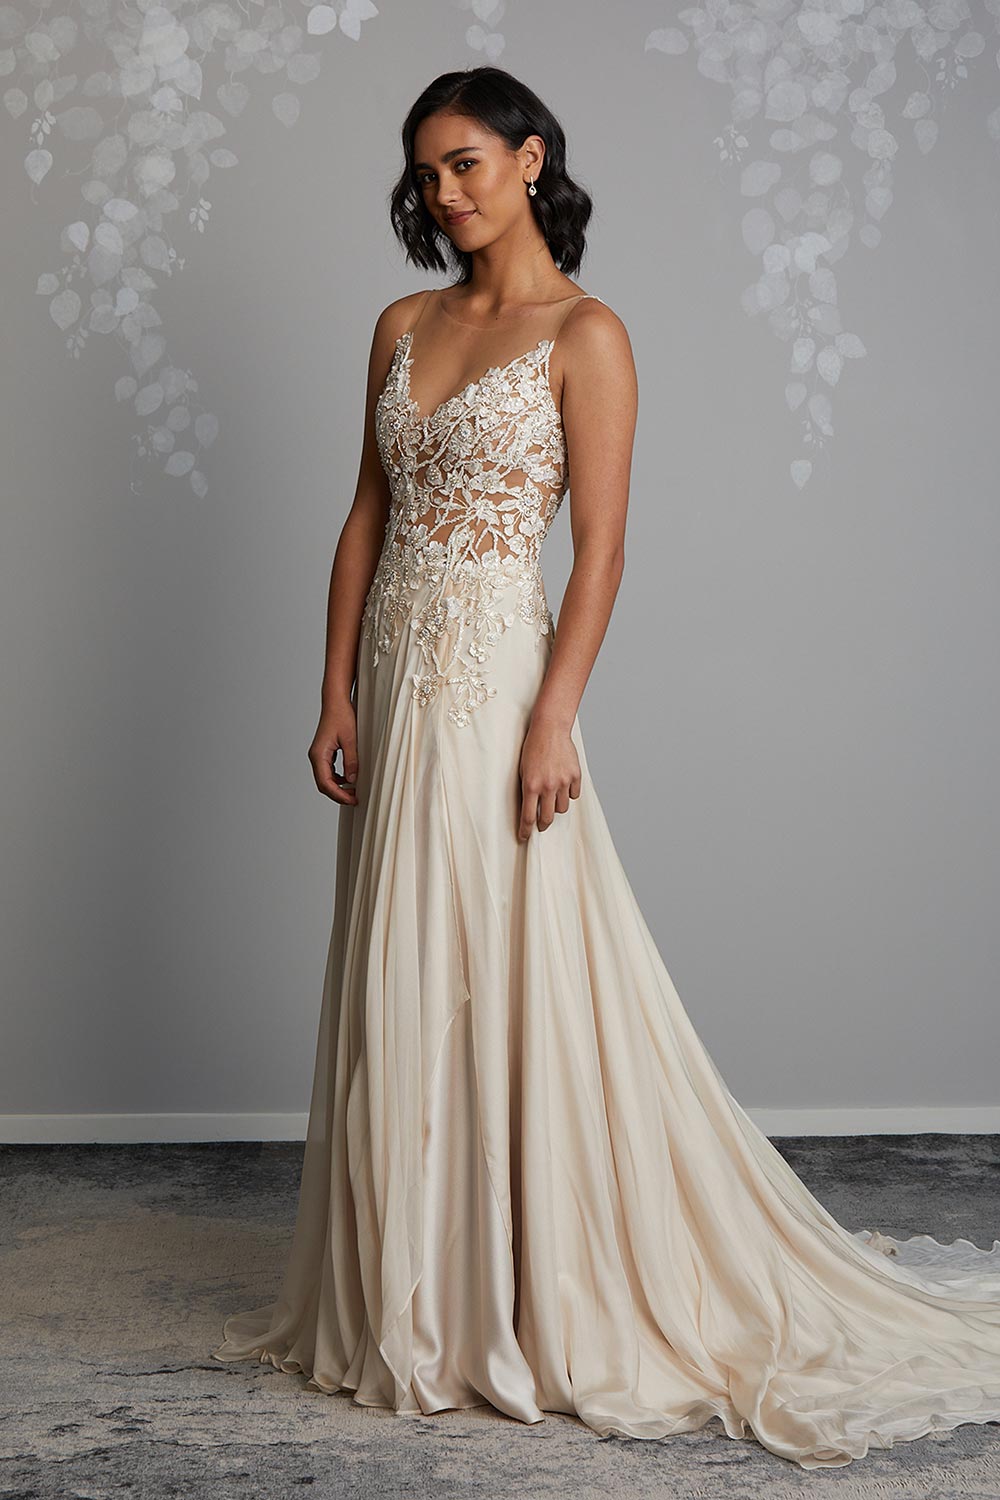 Champagne Silk designer wedding gown. Semi sheer bodice with beaded botanical lace, dainty pearls & sequins. Flowing chiffon skirt with front split, V-neck, low V-back and short train. Vinka Design Auckland, NZ